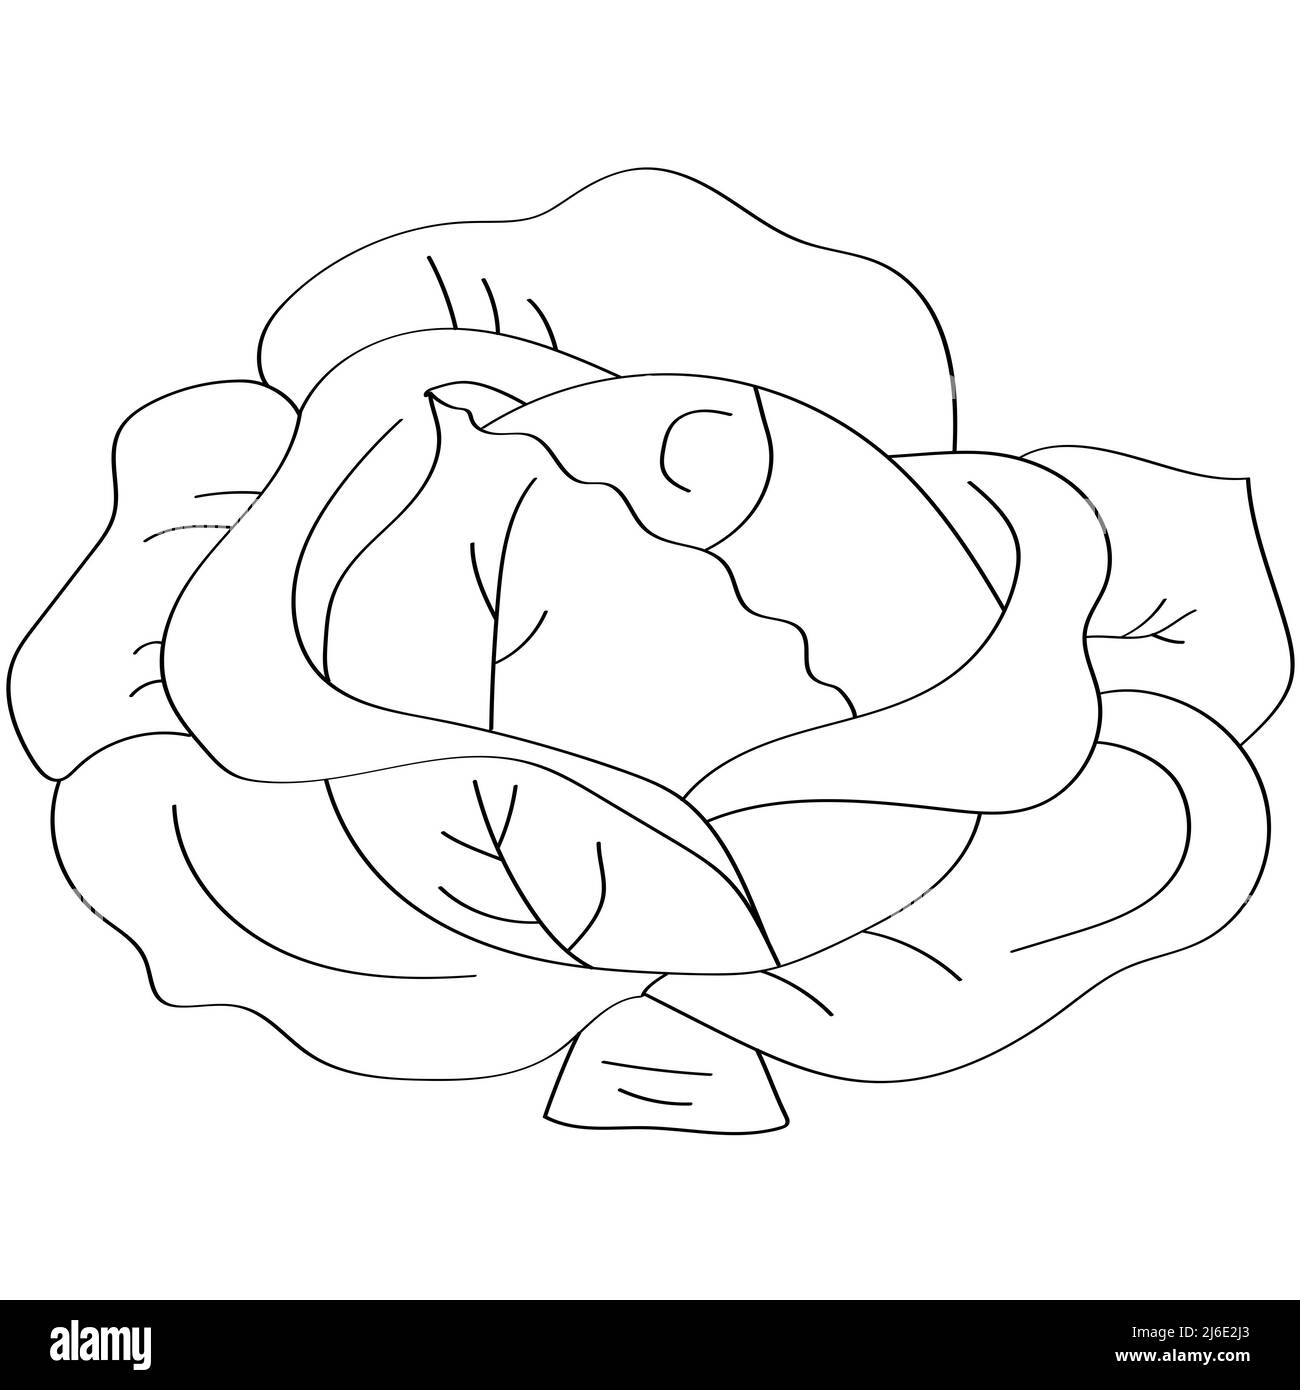 Cabbage Drawing Vector Images over 6300